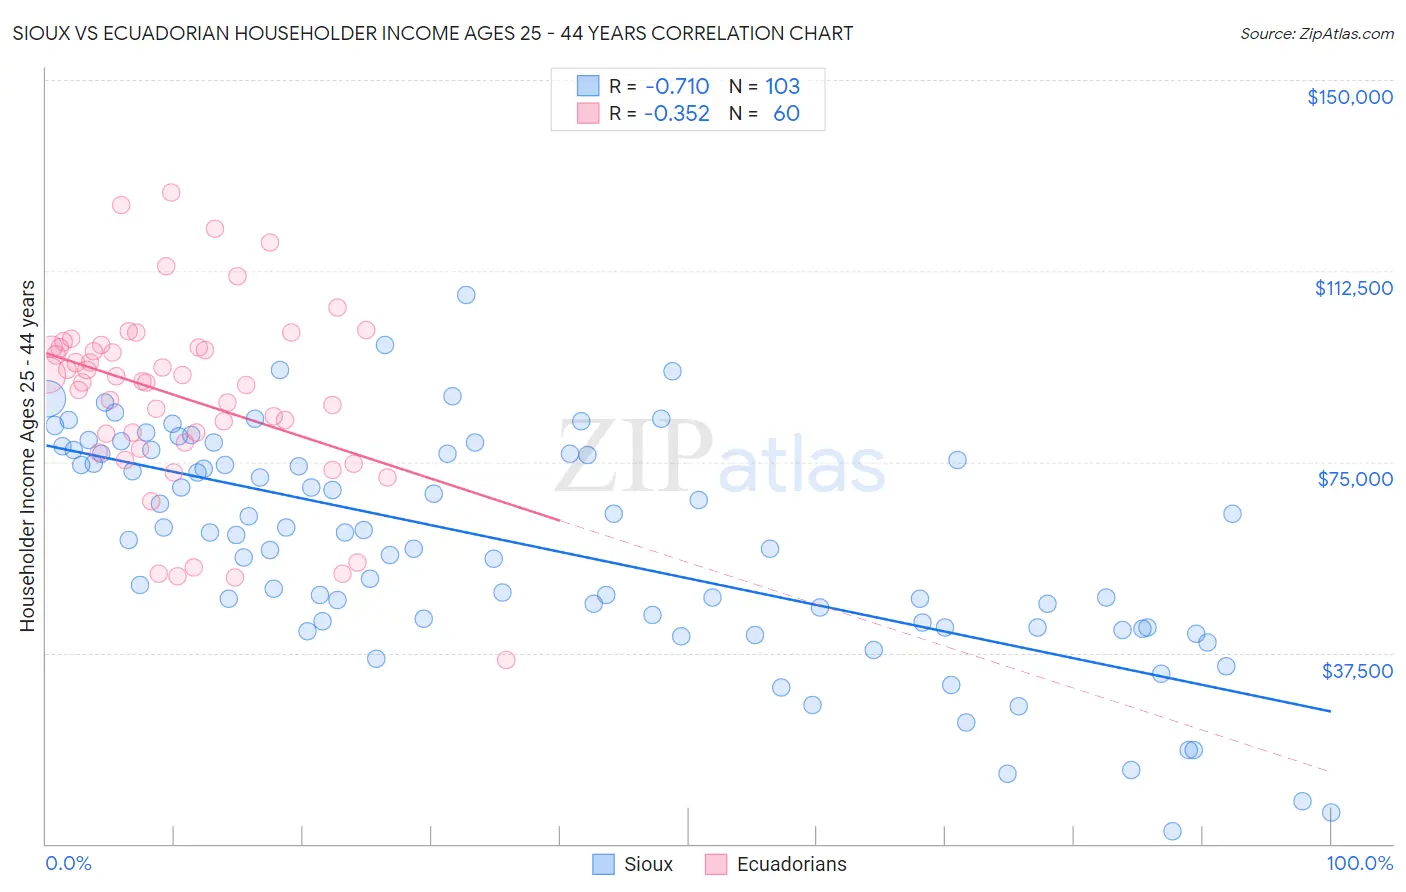 Sioux vs Ecuadorian Householder Income Ages 25 - 44 years